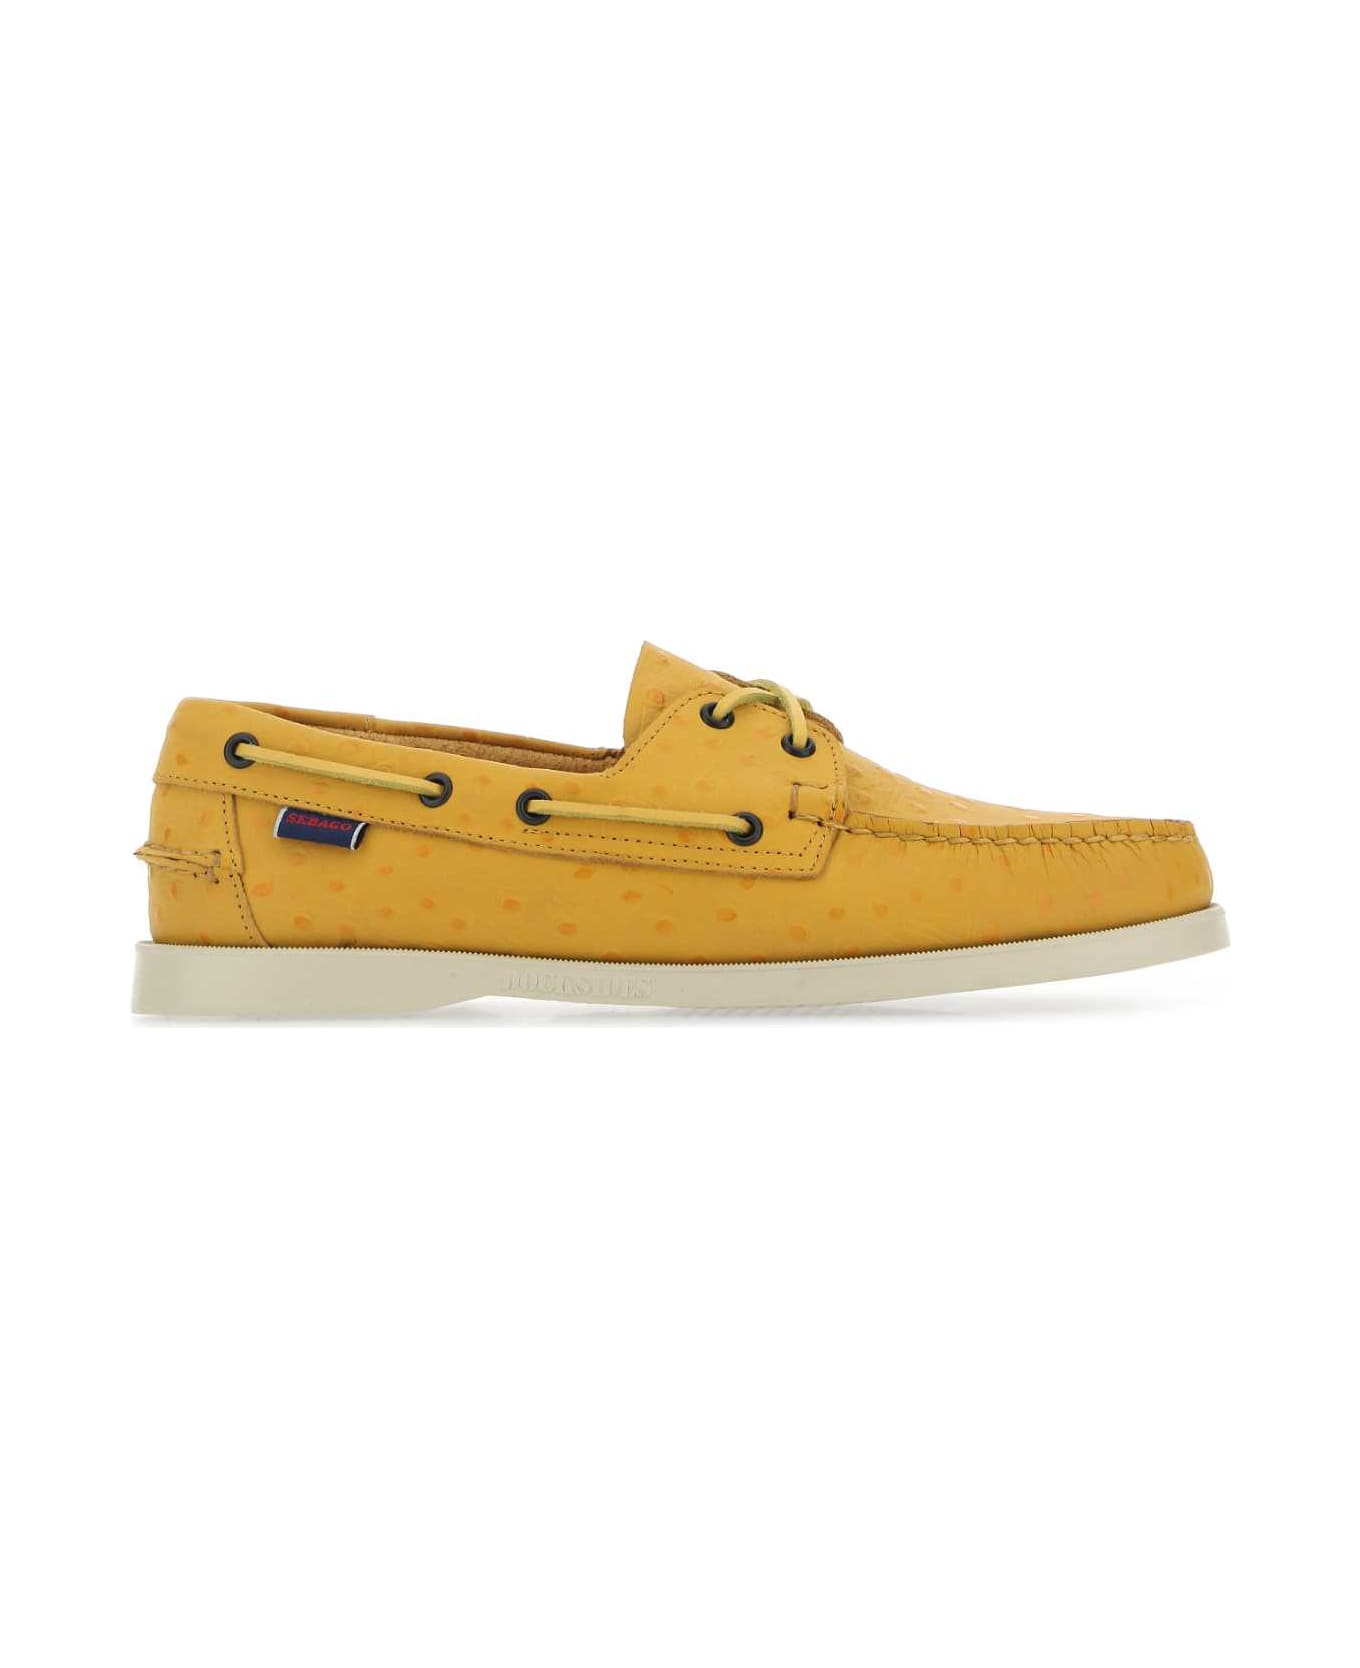 Sebago Yellow Leather Docksides Loafers - XQ9